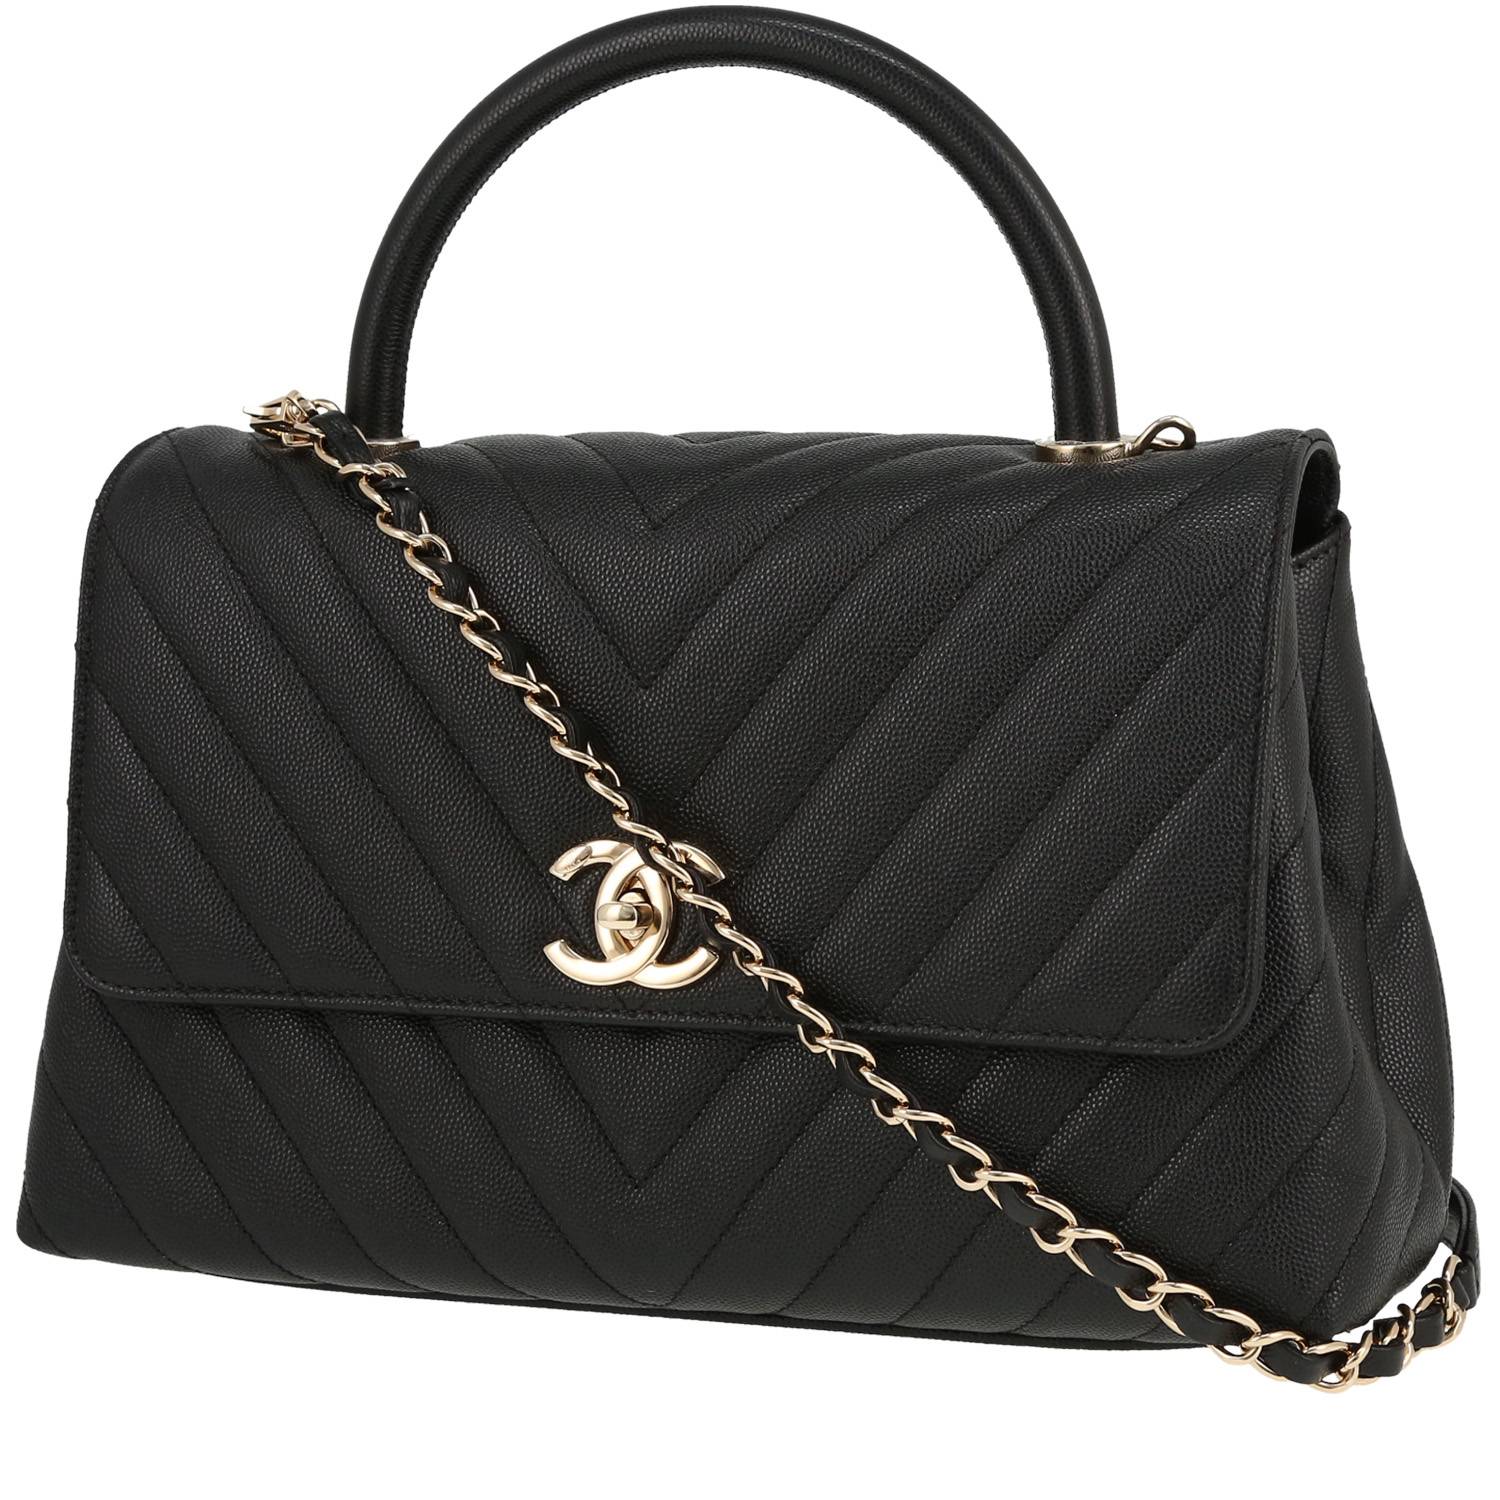 CHANEL Lambskin Quilted Mini Graphic Flap Bag Black 1391303 | FASHIONPHILE